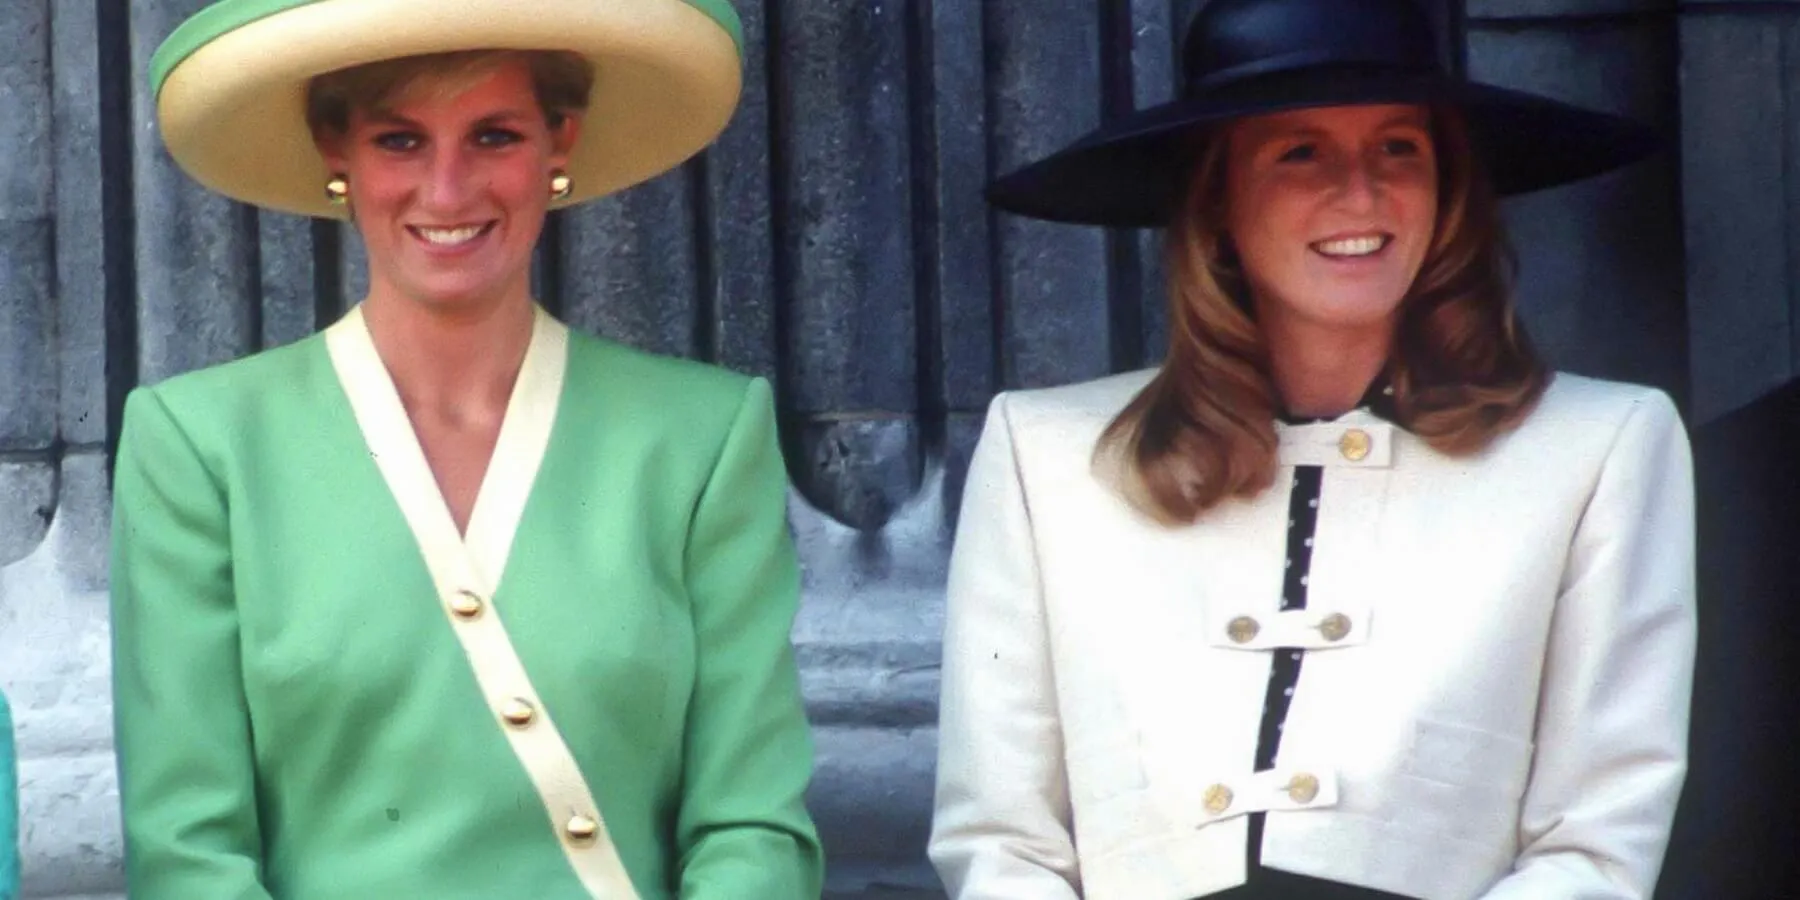 Princess Diana and Sarah Ferguson appeared at The Battle of Britain Parade, on the balcony of Buckingham Palace, on September 15, 1990 in, London, United Kingdom.